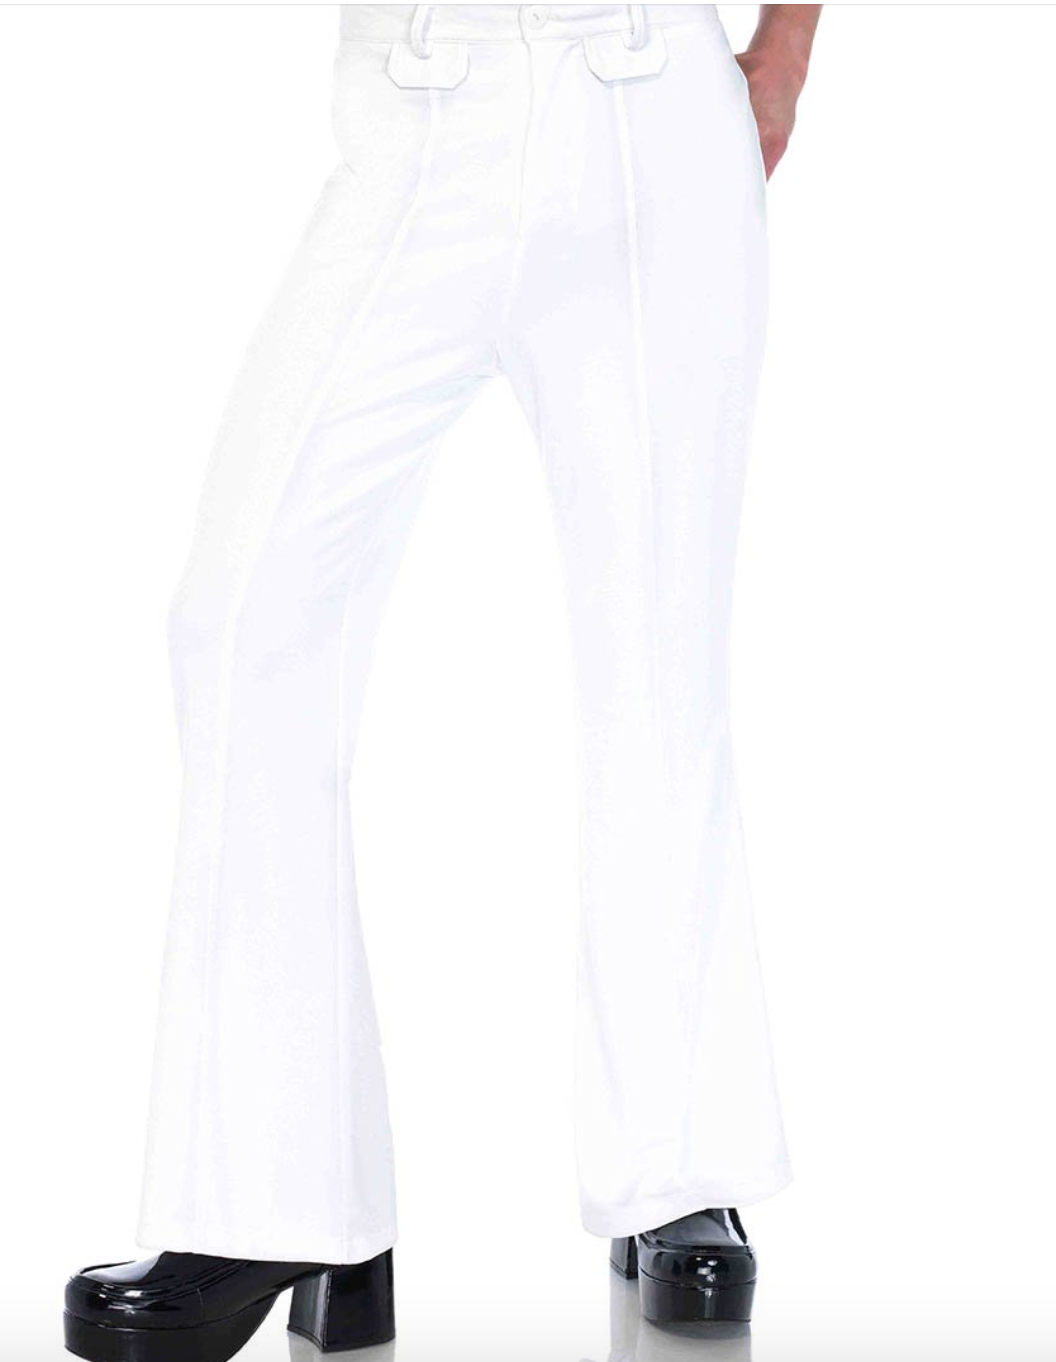 Deluxe Adult White Bell Bottom Disco Pants Candy Apple Costumes   idusemiduedutr